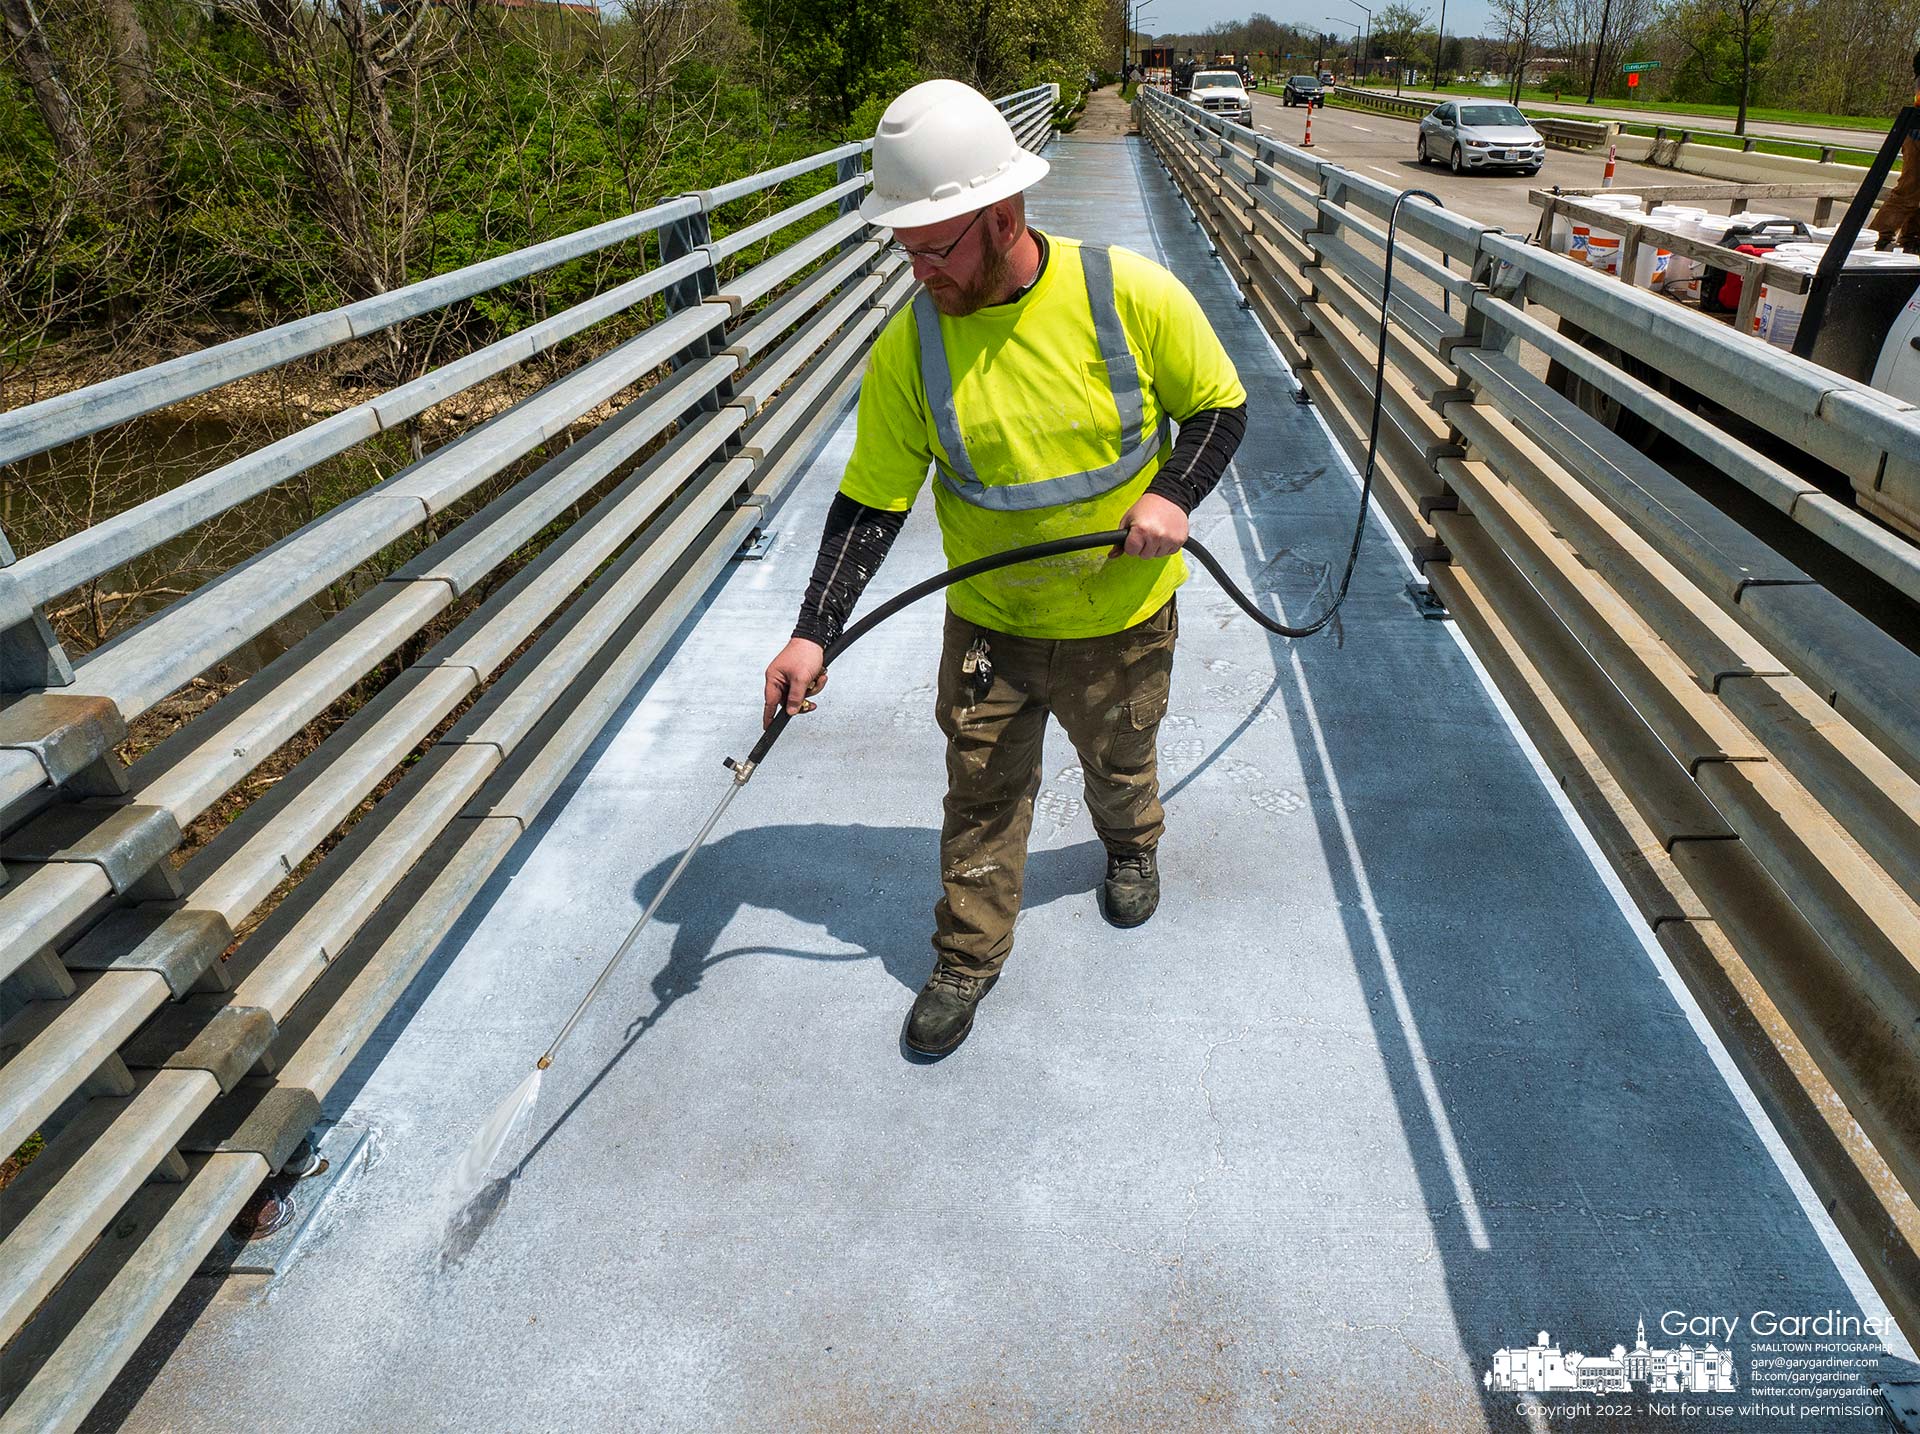 A contractor sprays sealant on the concrete sidewalk on the bridge crossing Alum Creek on Polaris Parkway after removing parts of the surface that needed repairs. My Final Photo for April 28, 2022.